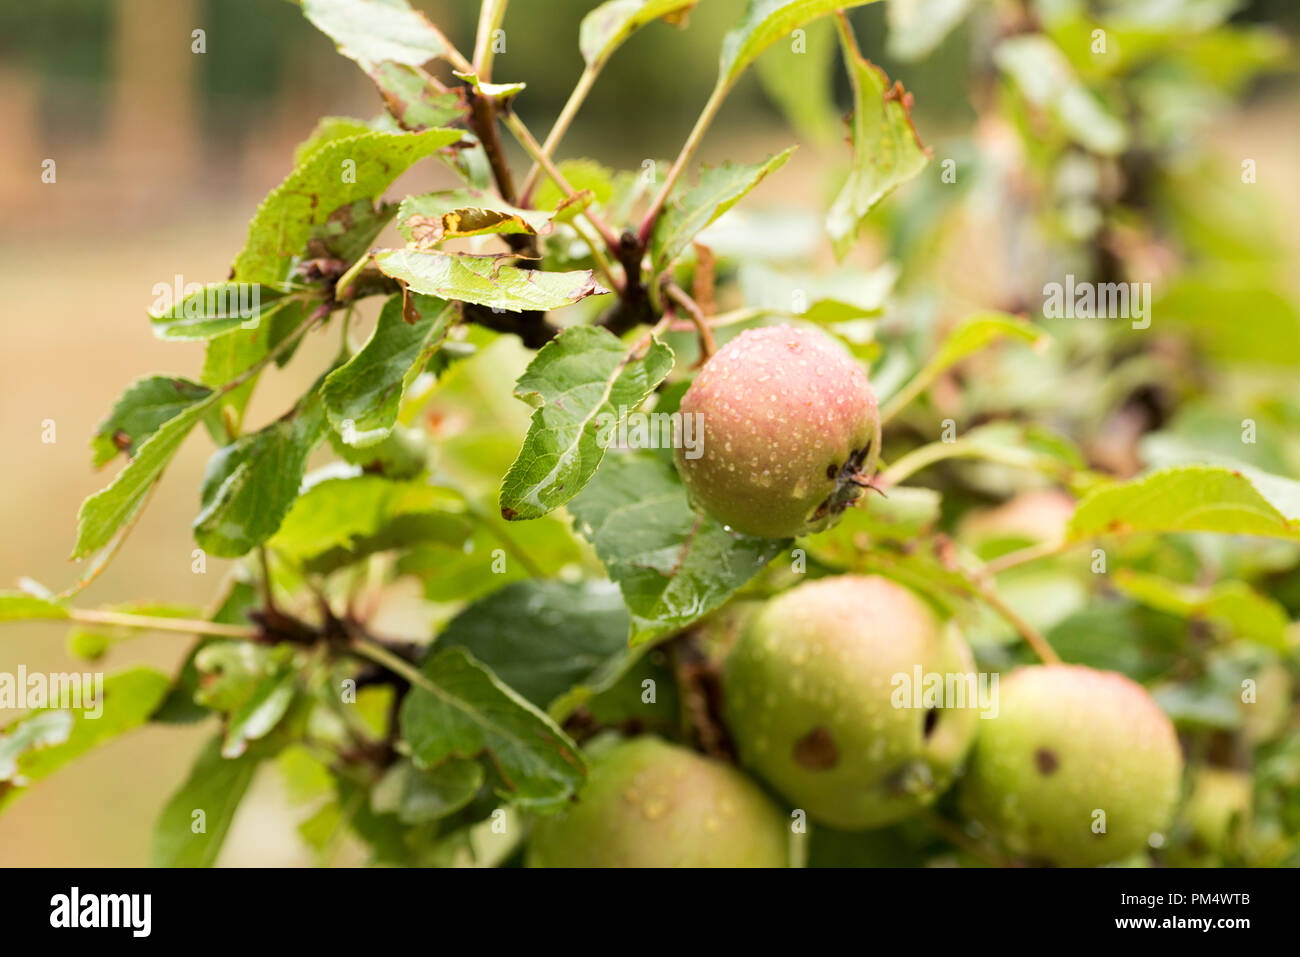 Fresh Red Apple On Tree Branch, Stock Photo